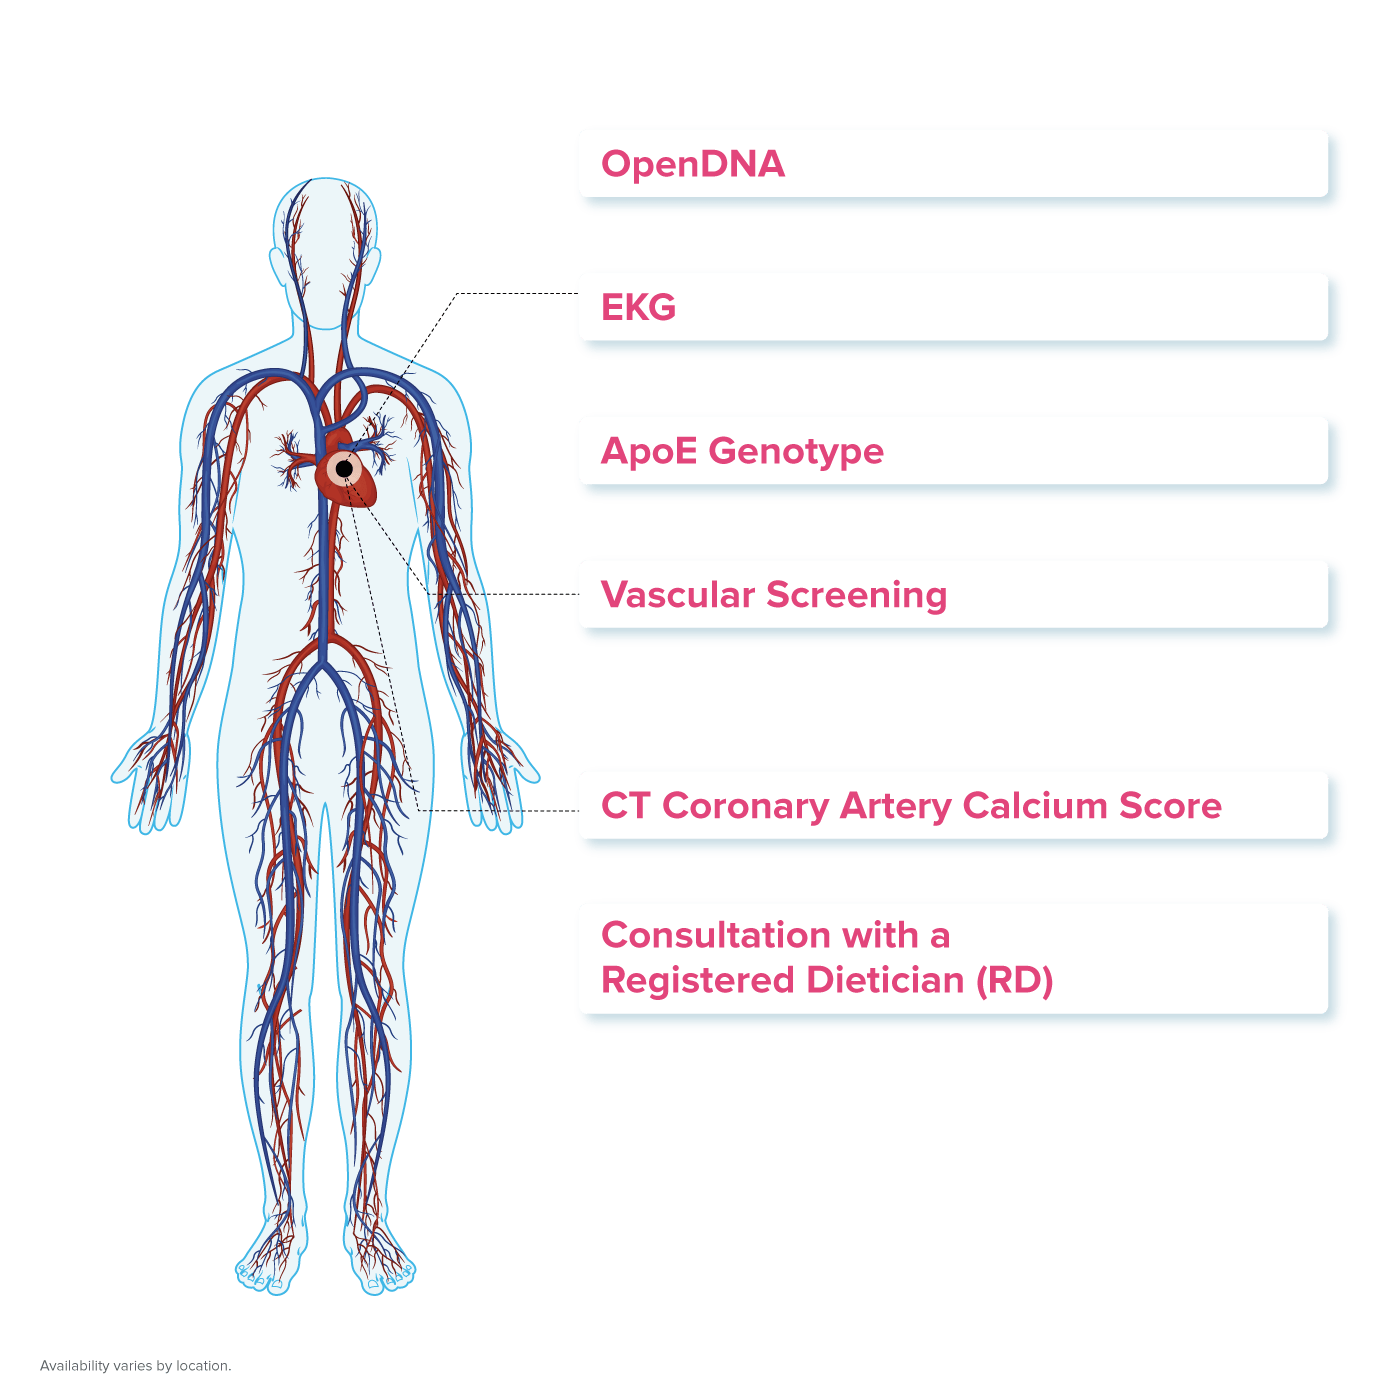 Image of human body with PartnerMD's cardio tests